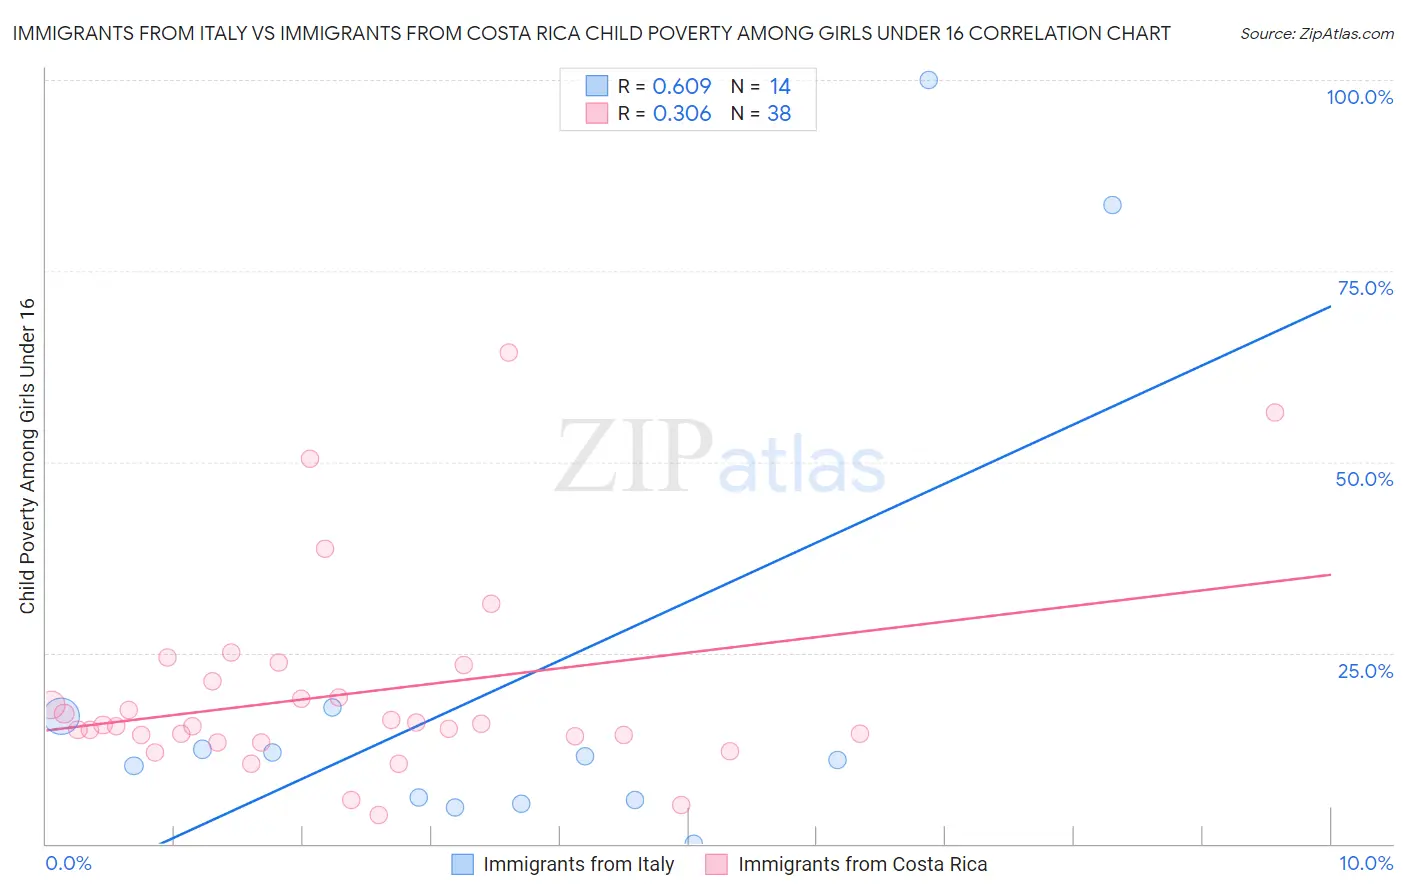 Immigrants from Italy vs Immigrants from Costa Rica Child Poverty Among Girls Under 16